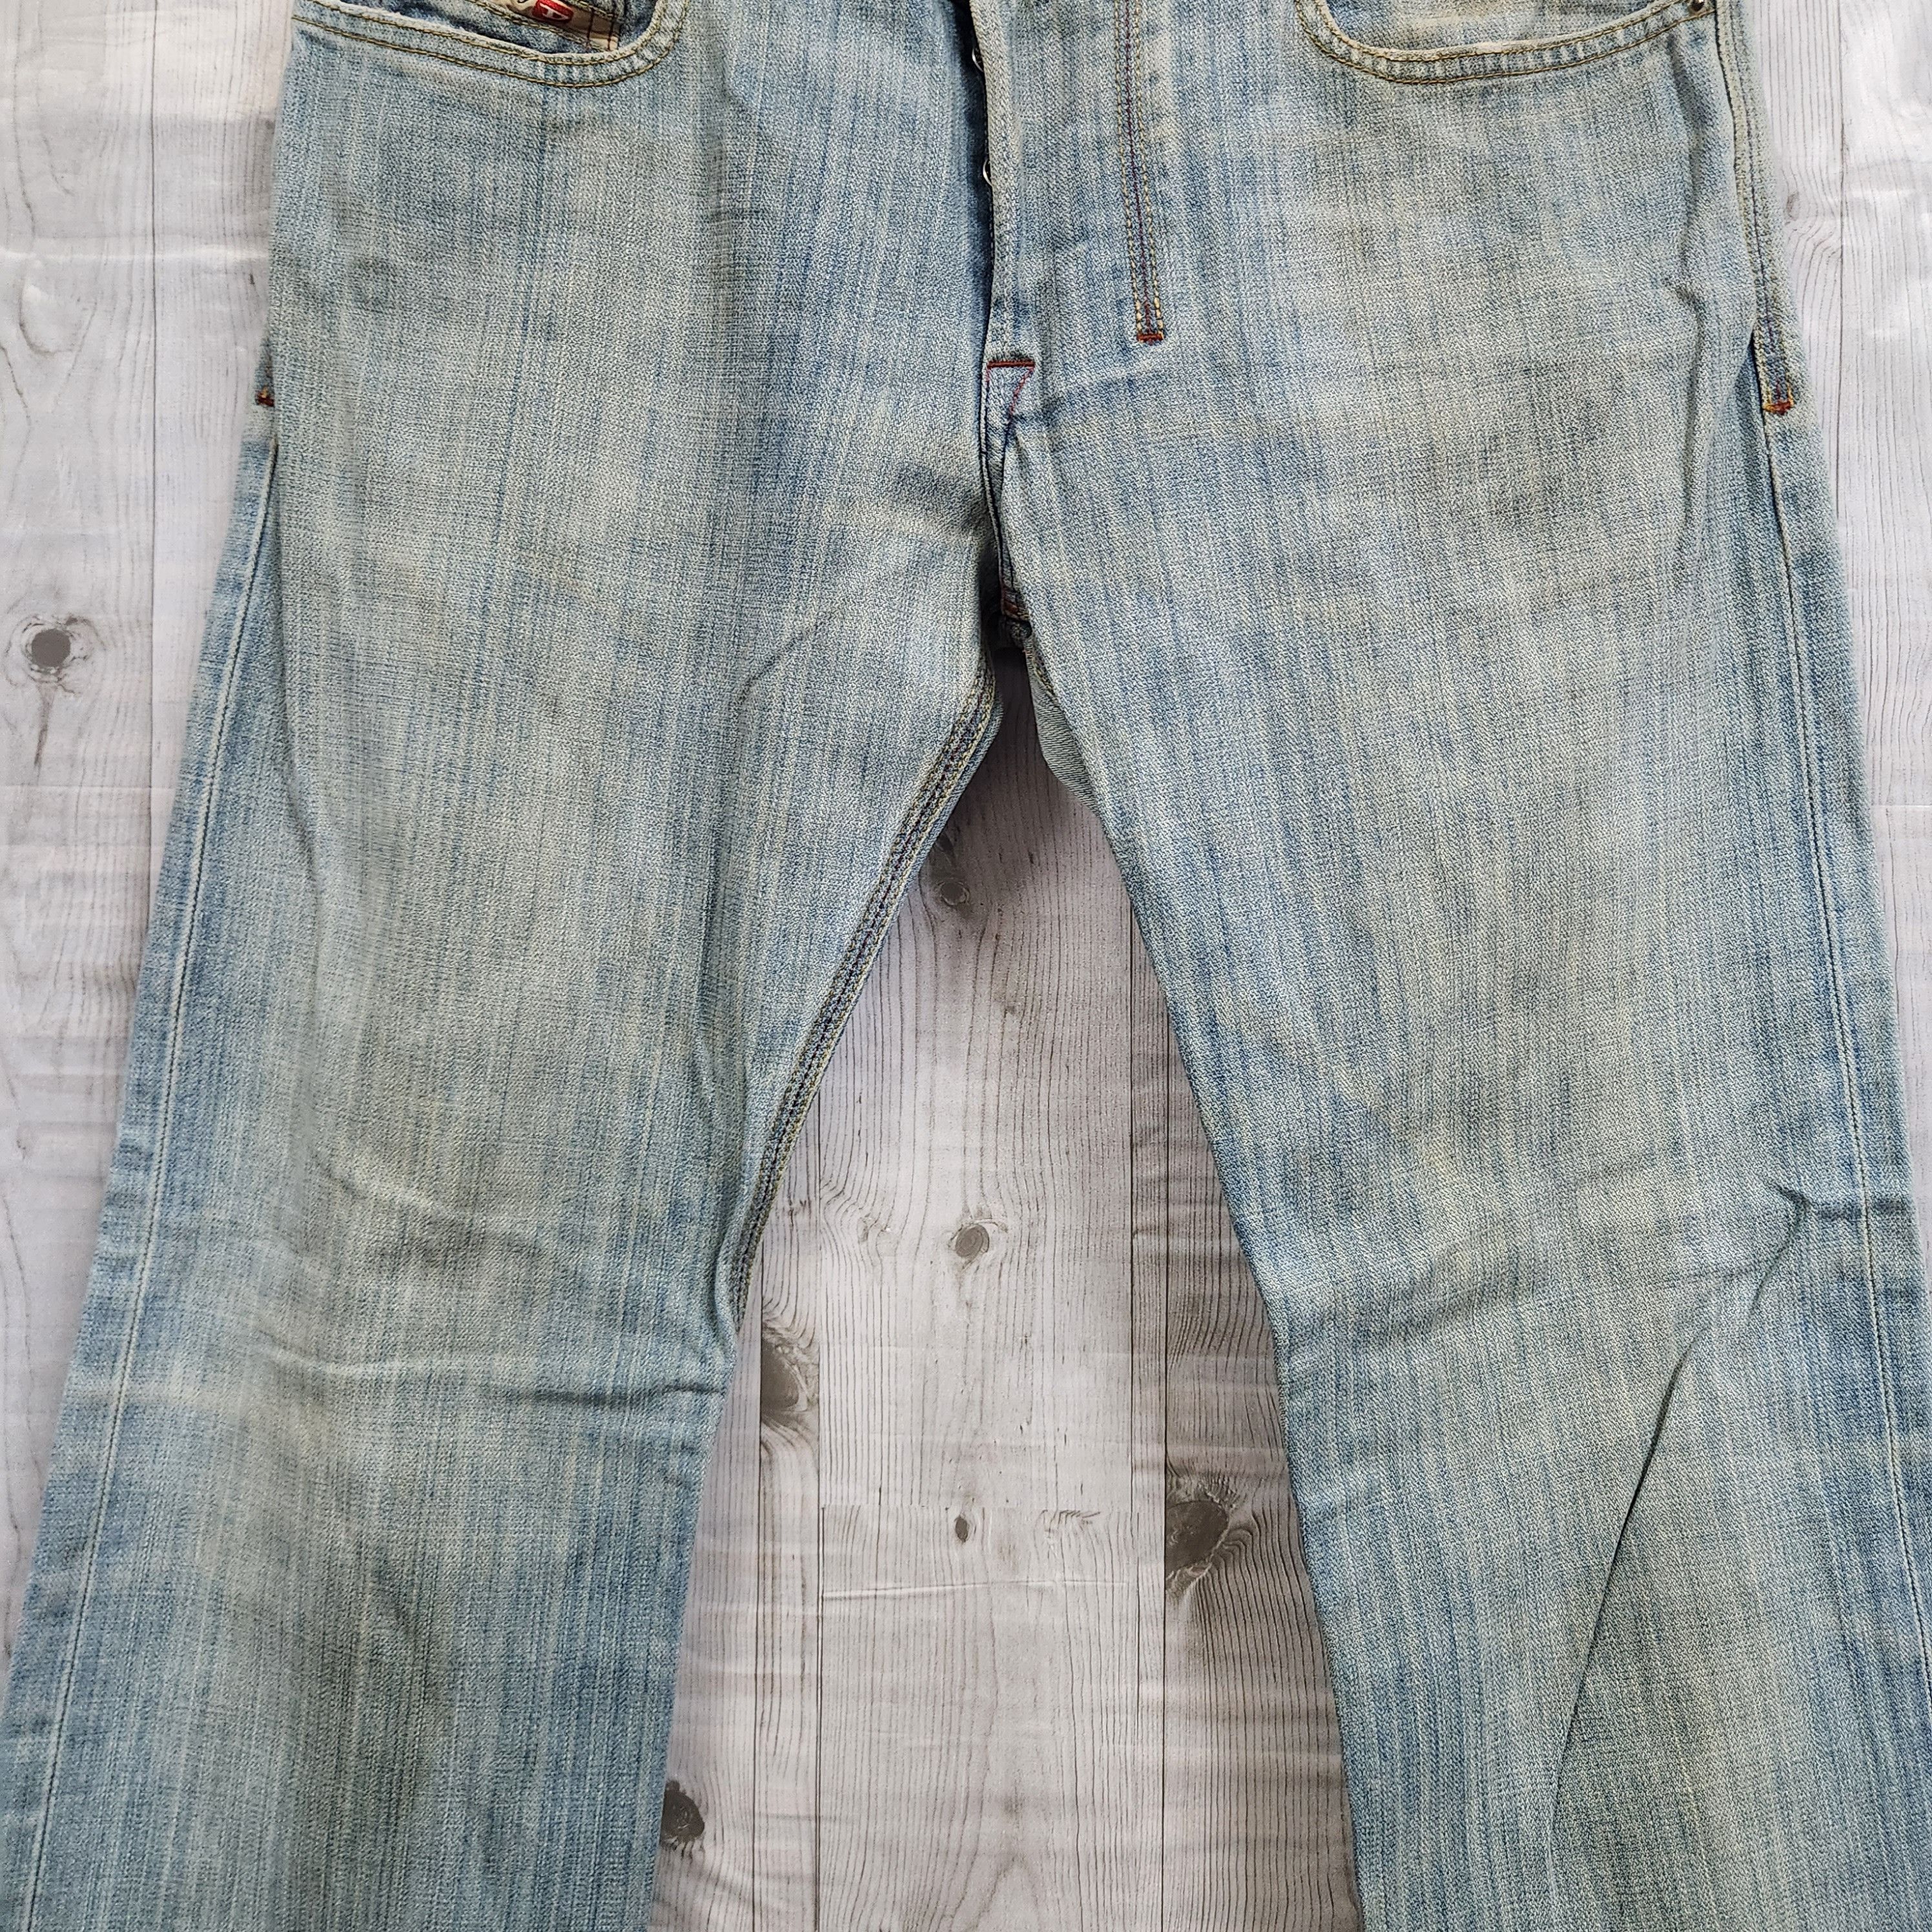 Mudwash Diesel Vintage Two Buttons Jeans Italy - 16